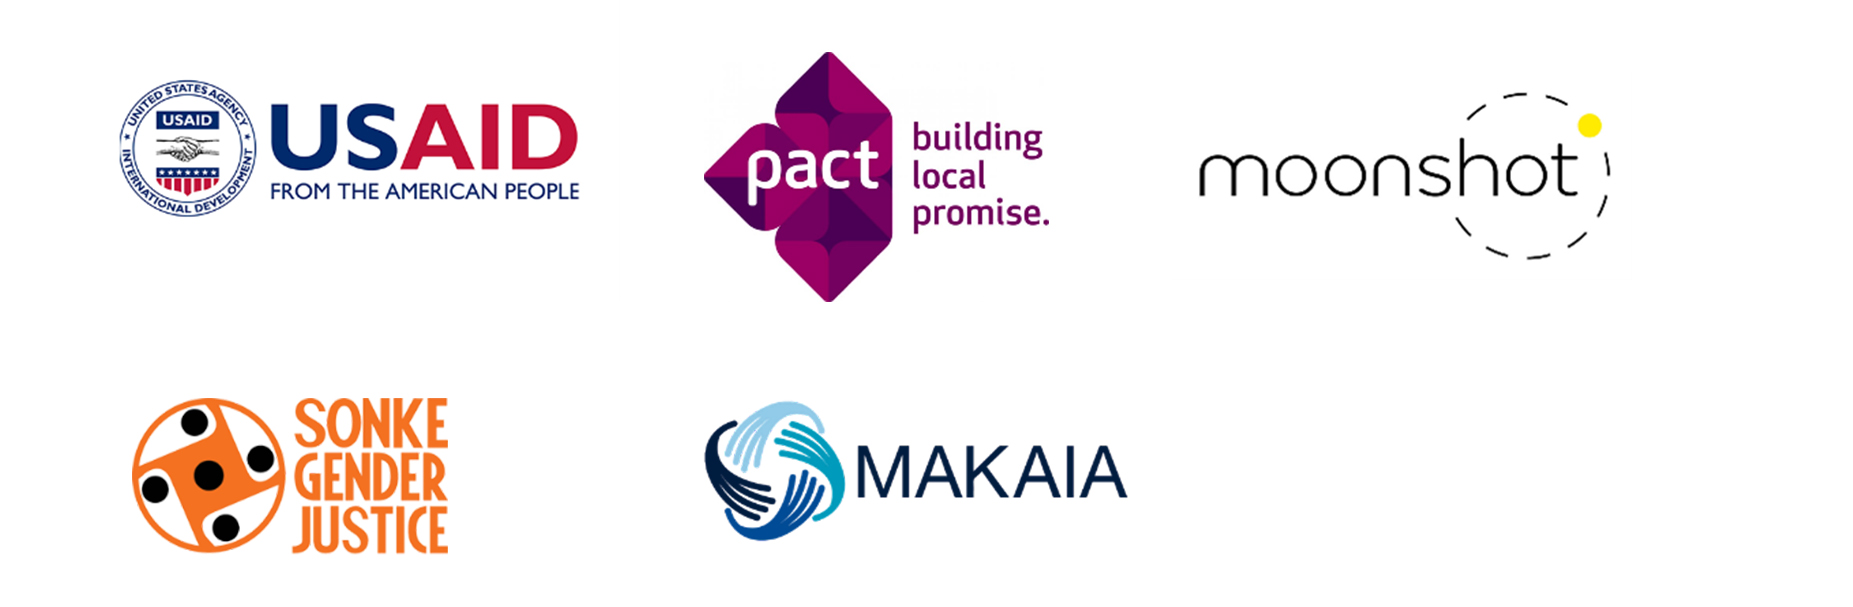 Logos for USAID, PACT, Moonshot, Sonke Gender Justice and Makaia